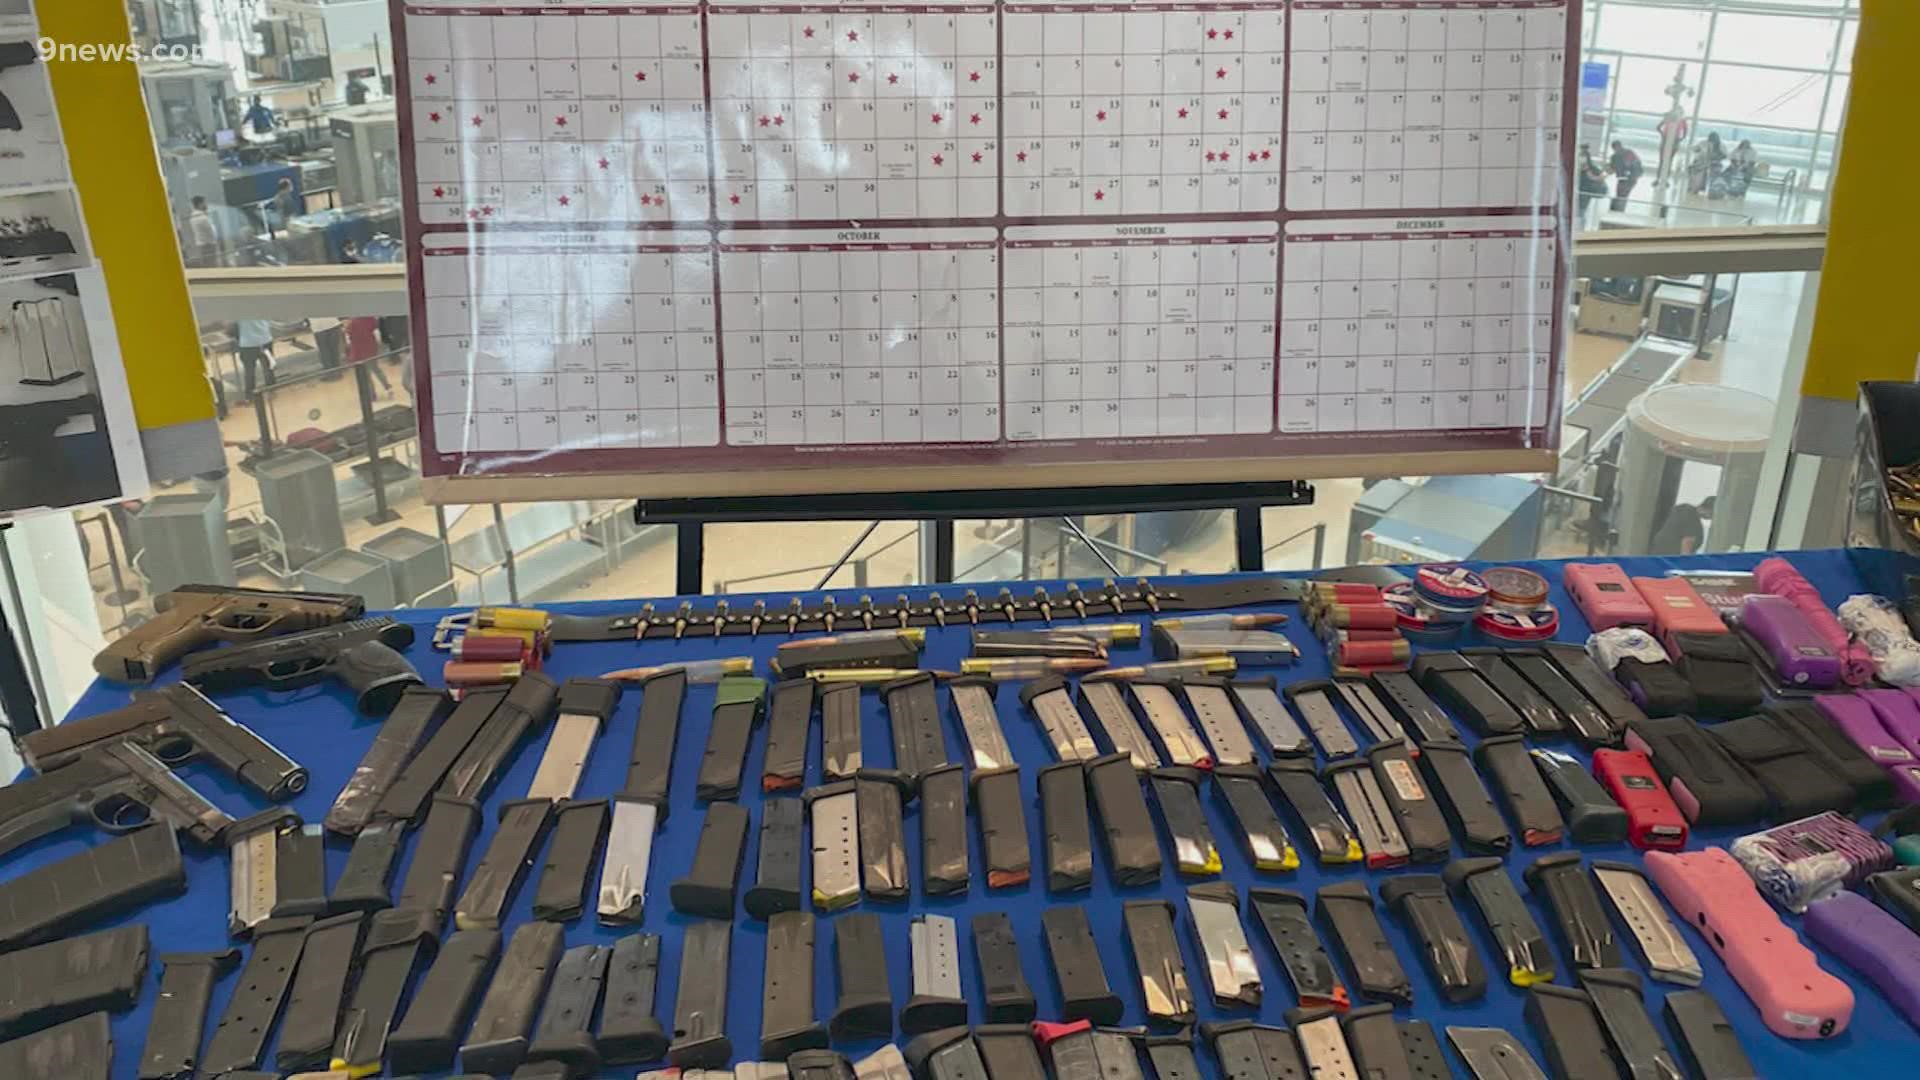 The Denver airport ranked sixth nationally for the number of firearms found at security checkpoints.